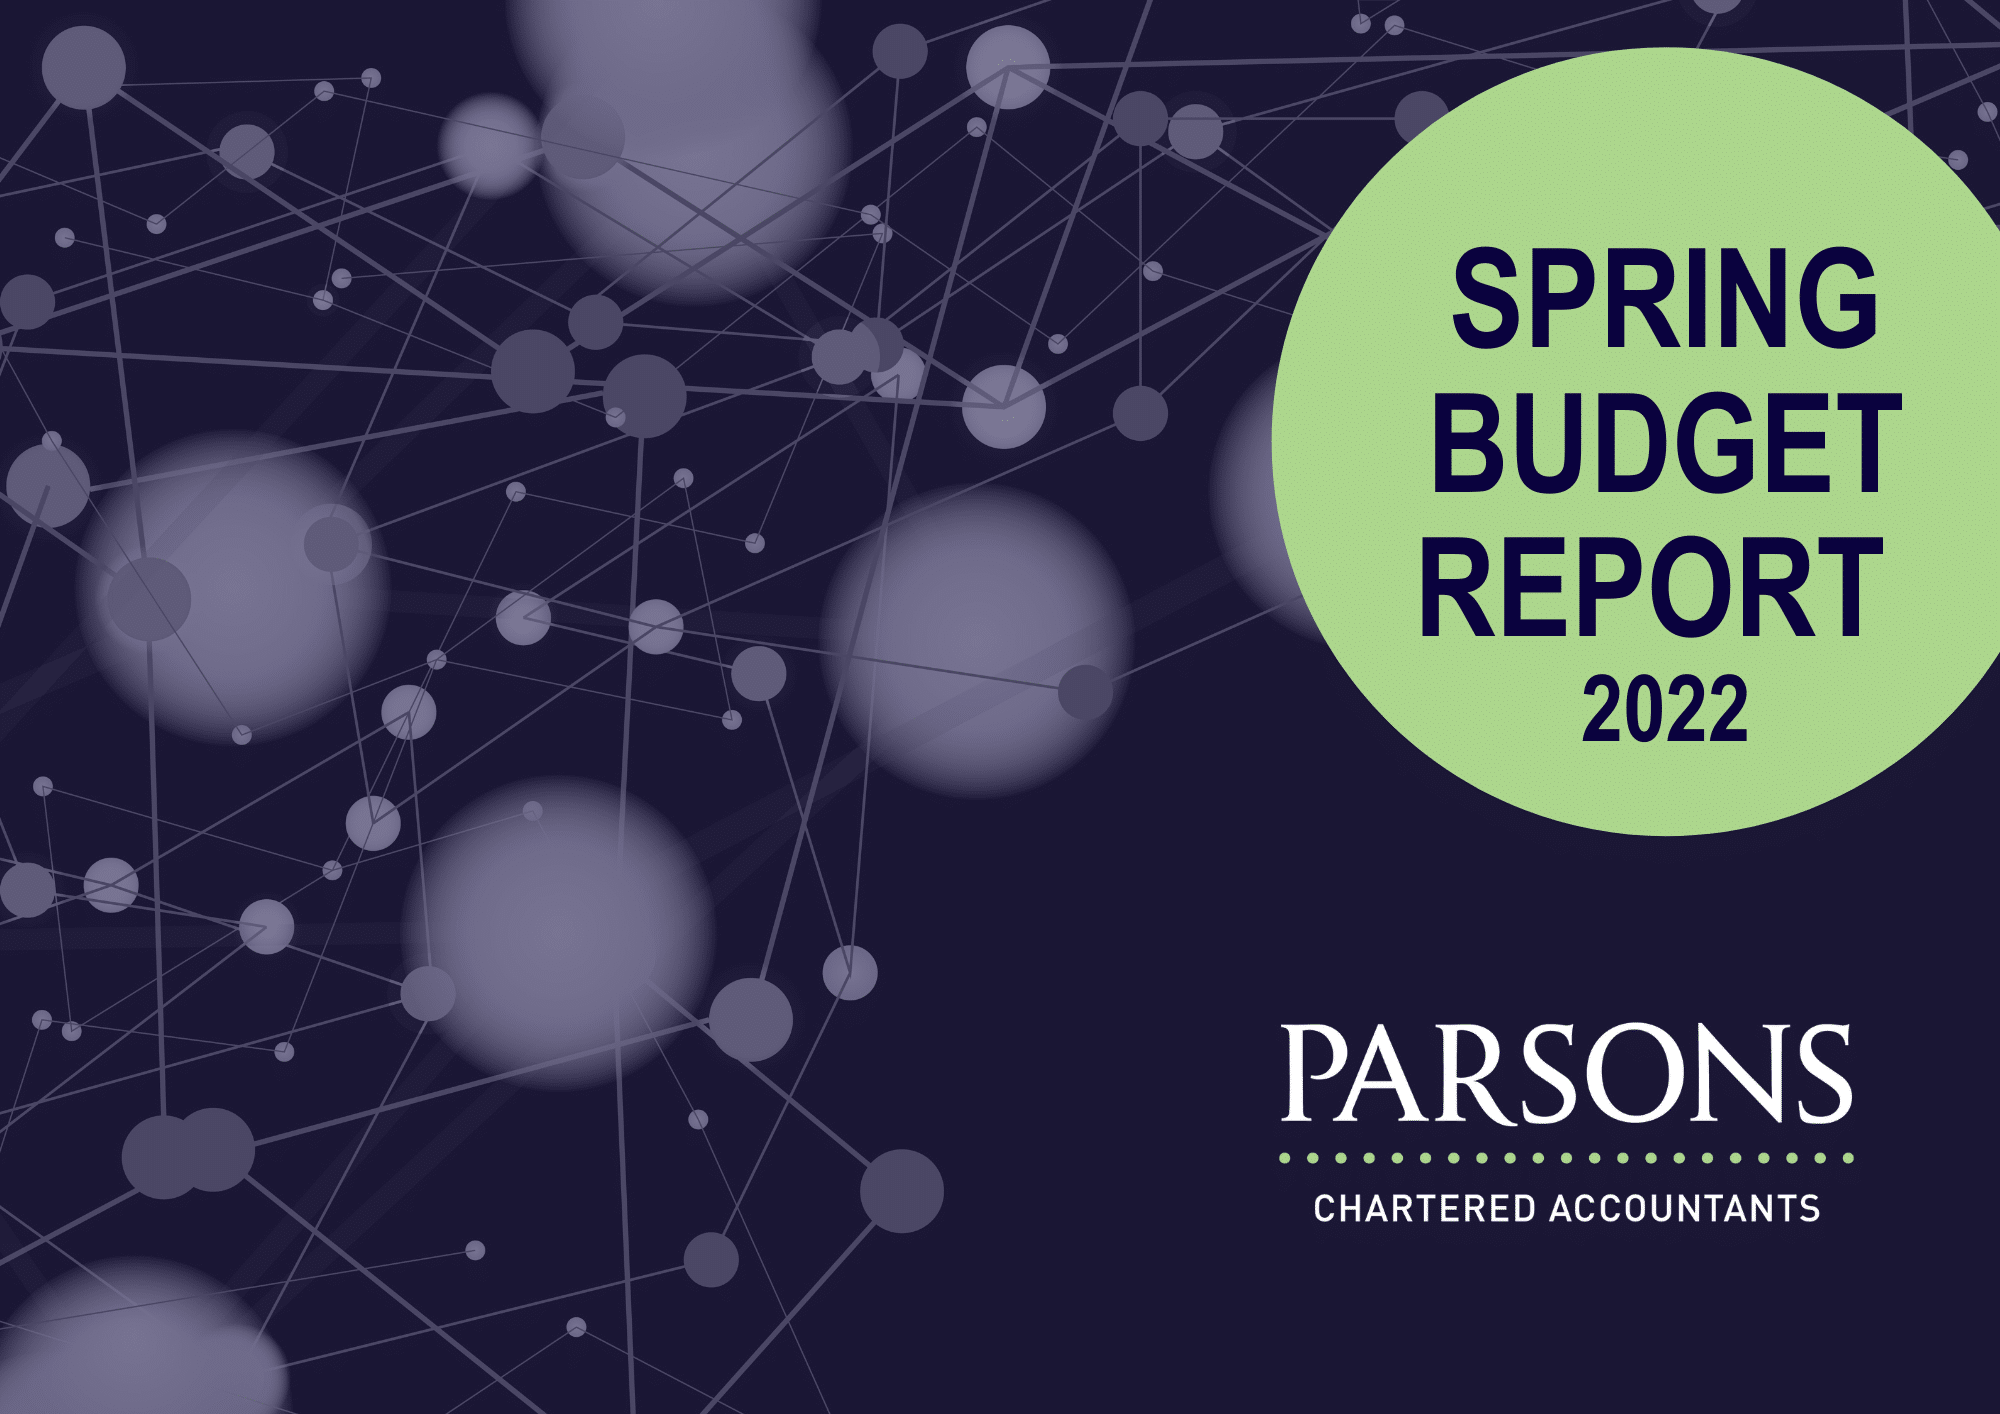 SPRING BUDGET REPORT 2022 COVER IMAGE